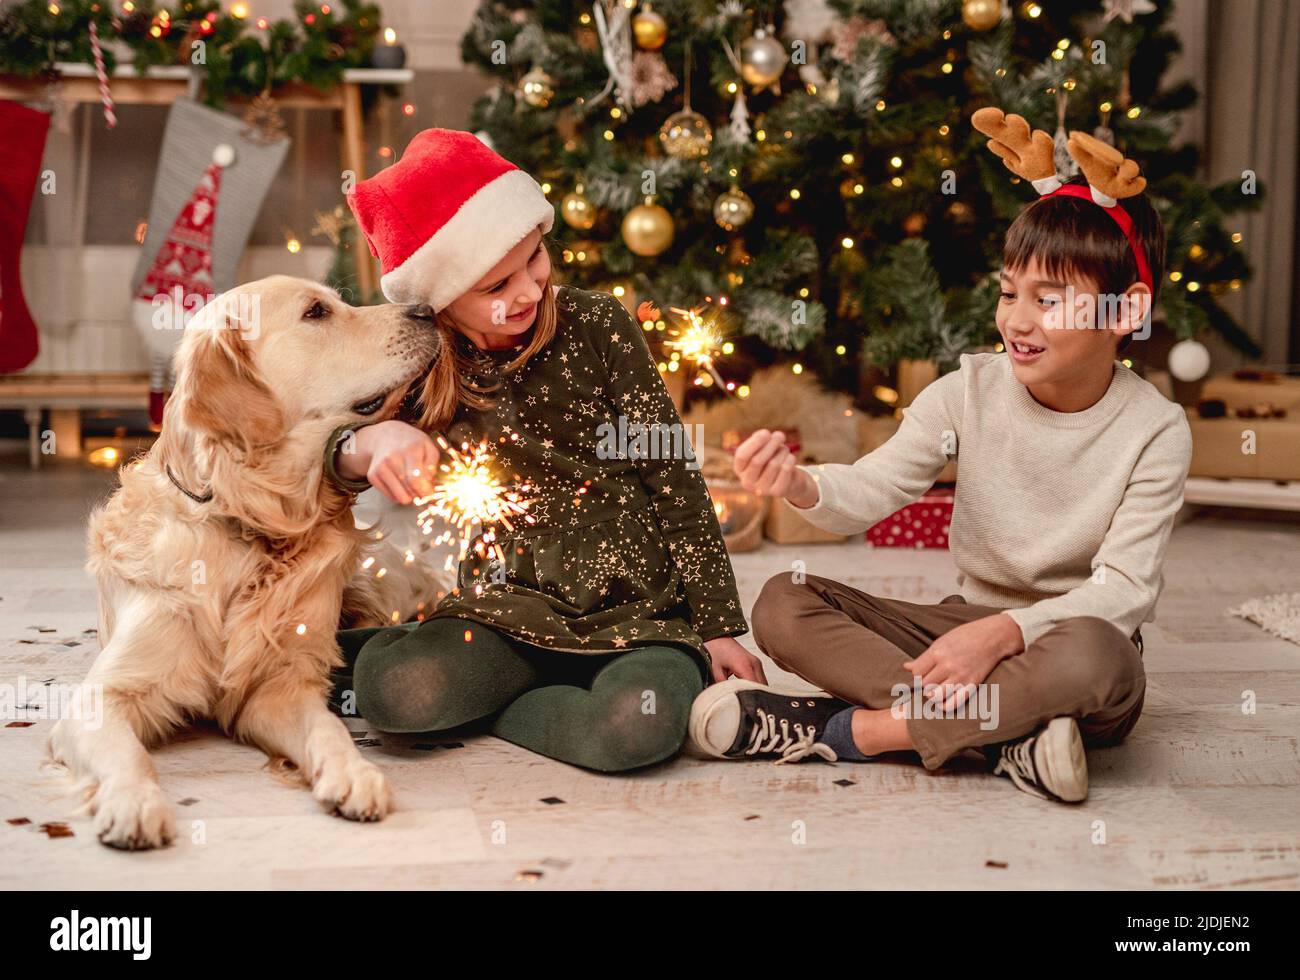 Little girl in santa hat and boy wearing reindeer horns rim holding sparklers while sitting beside golden retriever dog at home Stock Photo